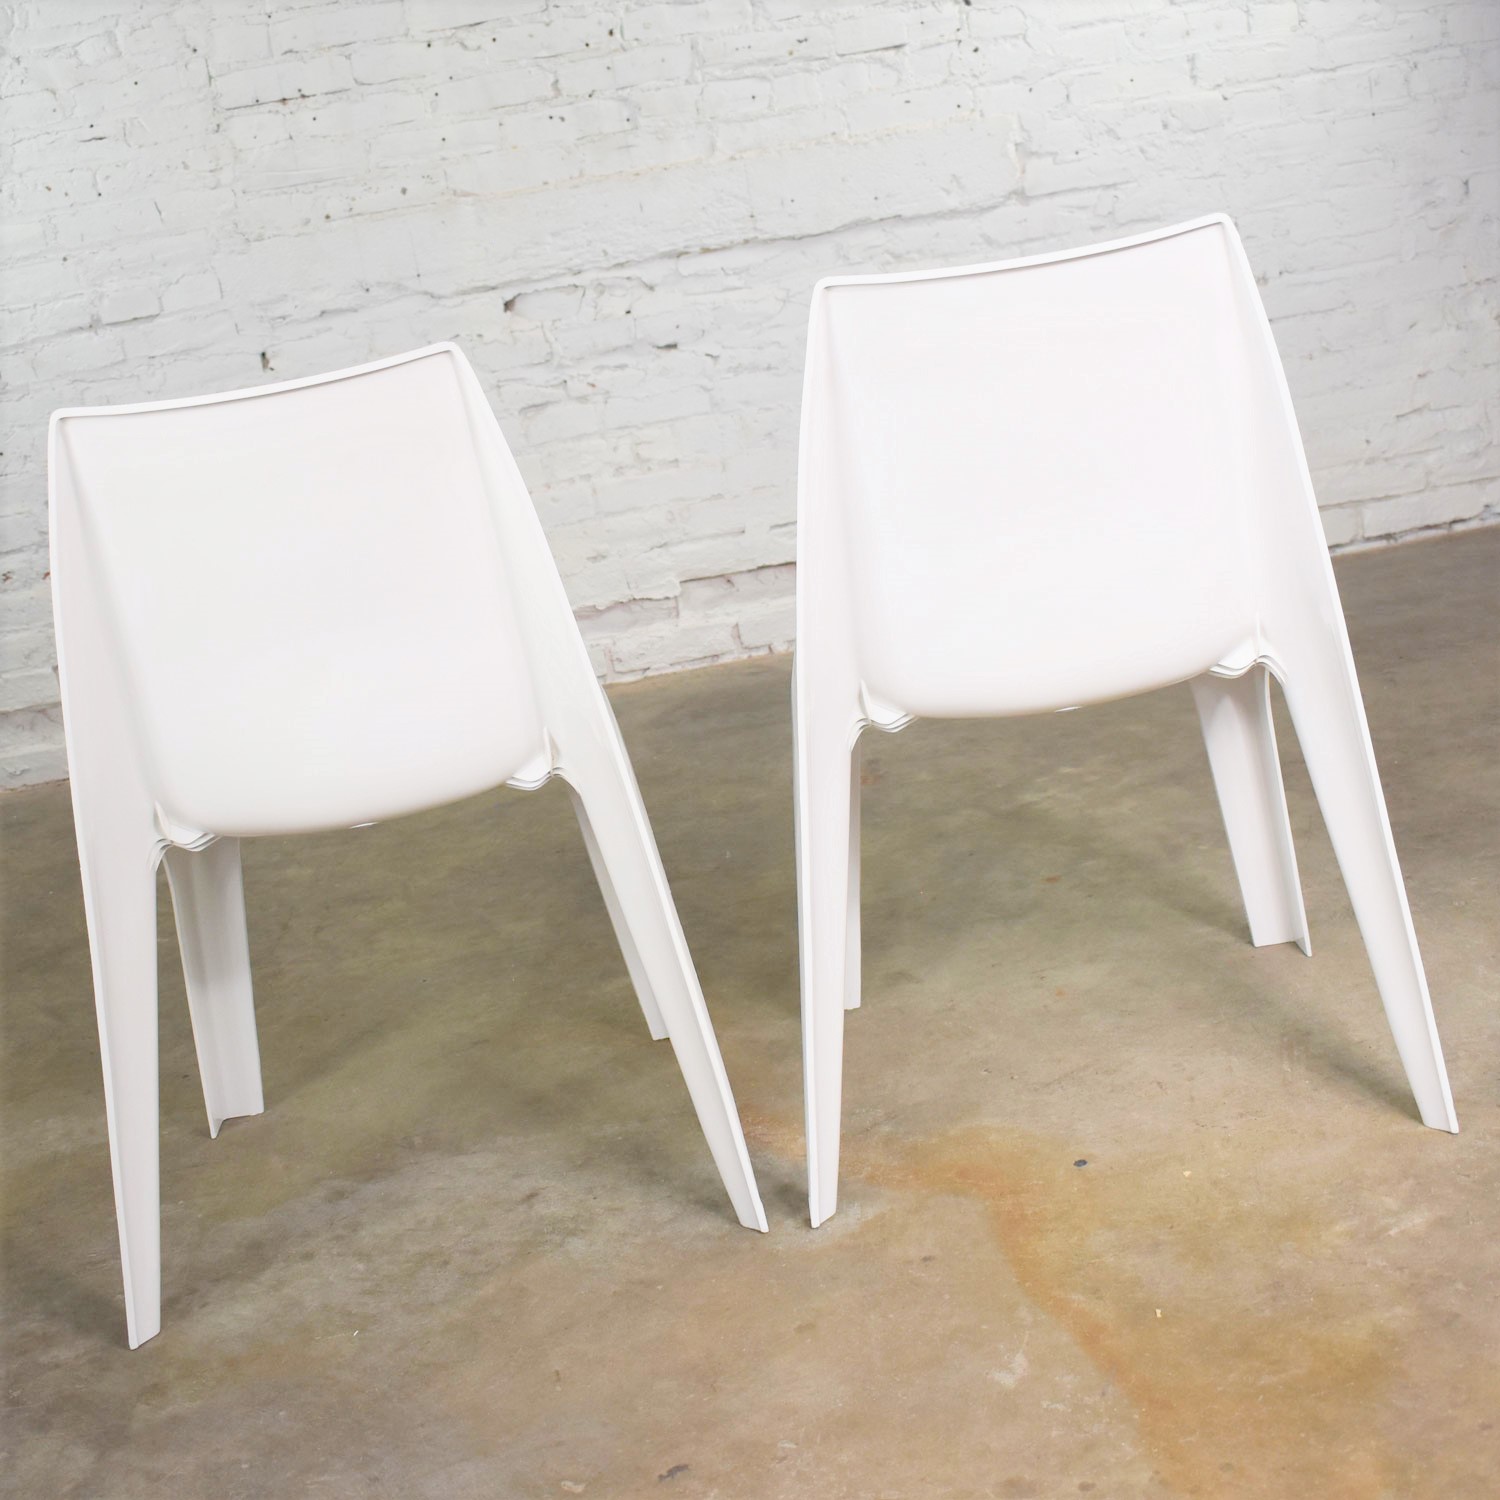 Pair Vintage Modern White Molded Plastic Chairs Style of Kartell 4850 by Castiglioni et al